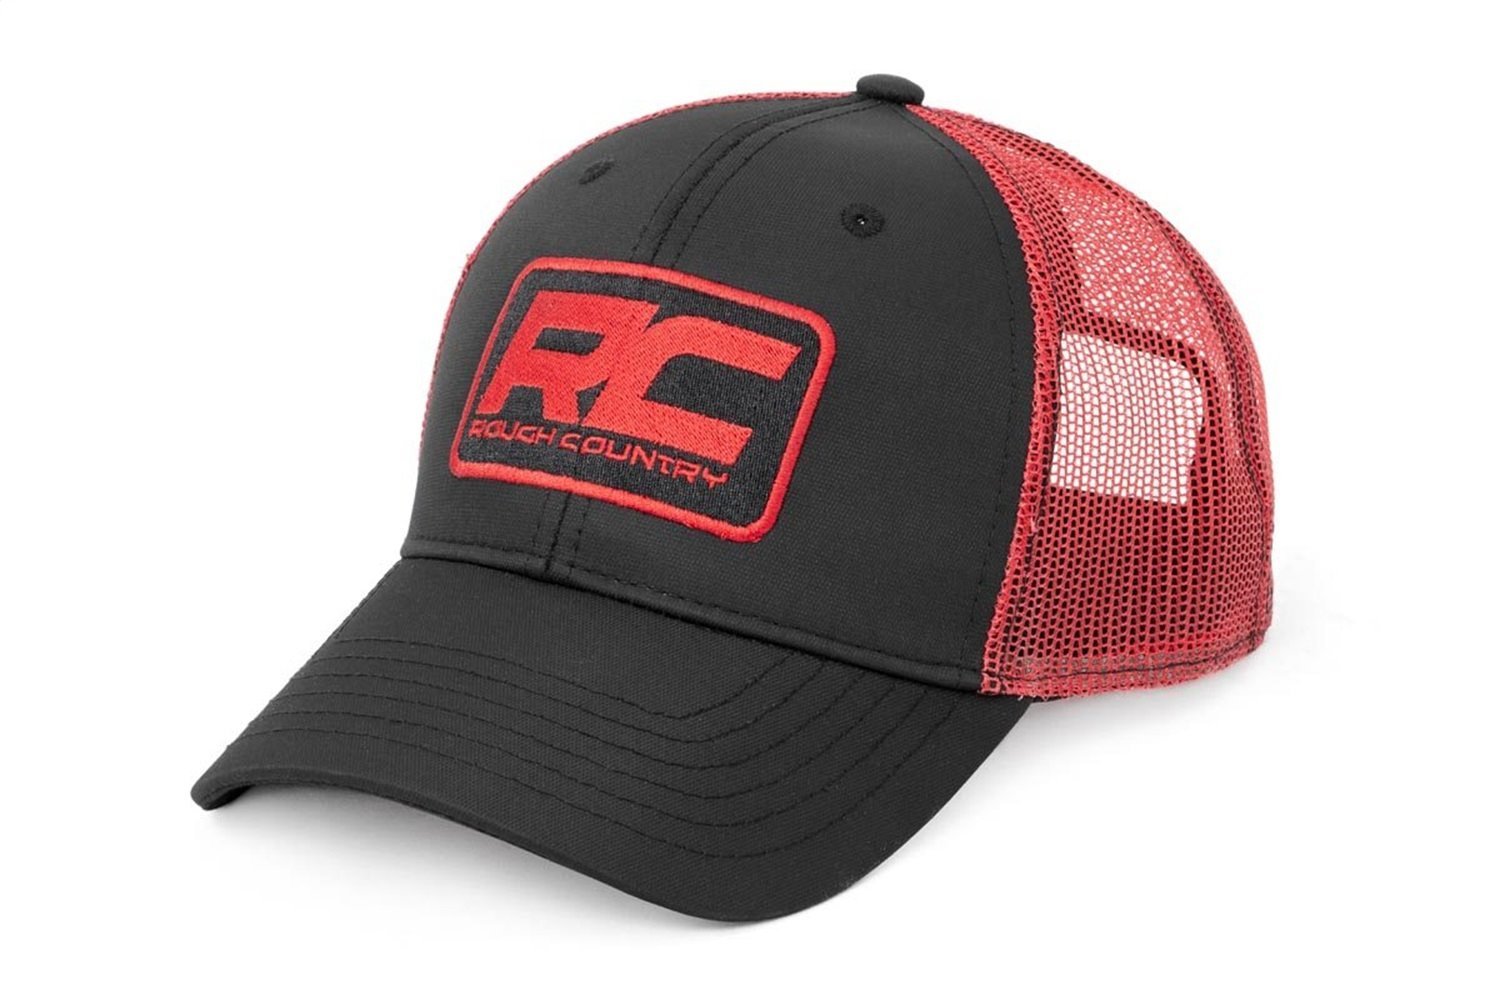 84124 Rough Country Mesh Hat - Black and Red